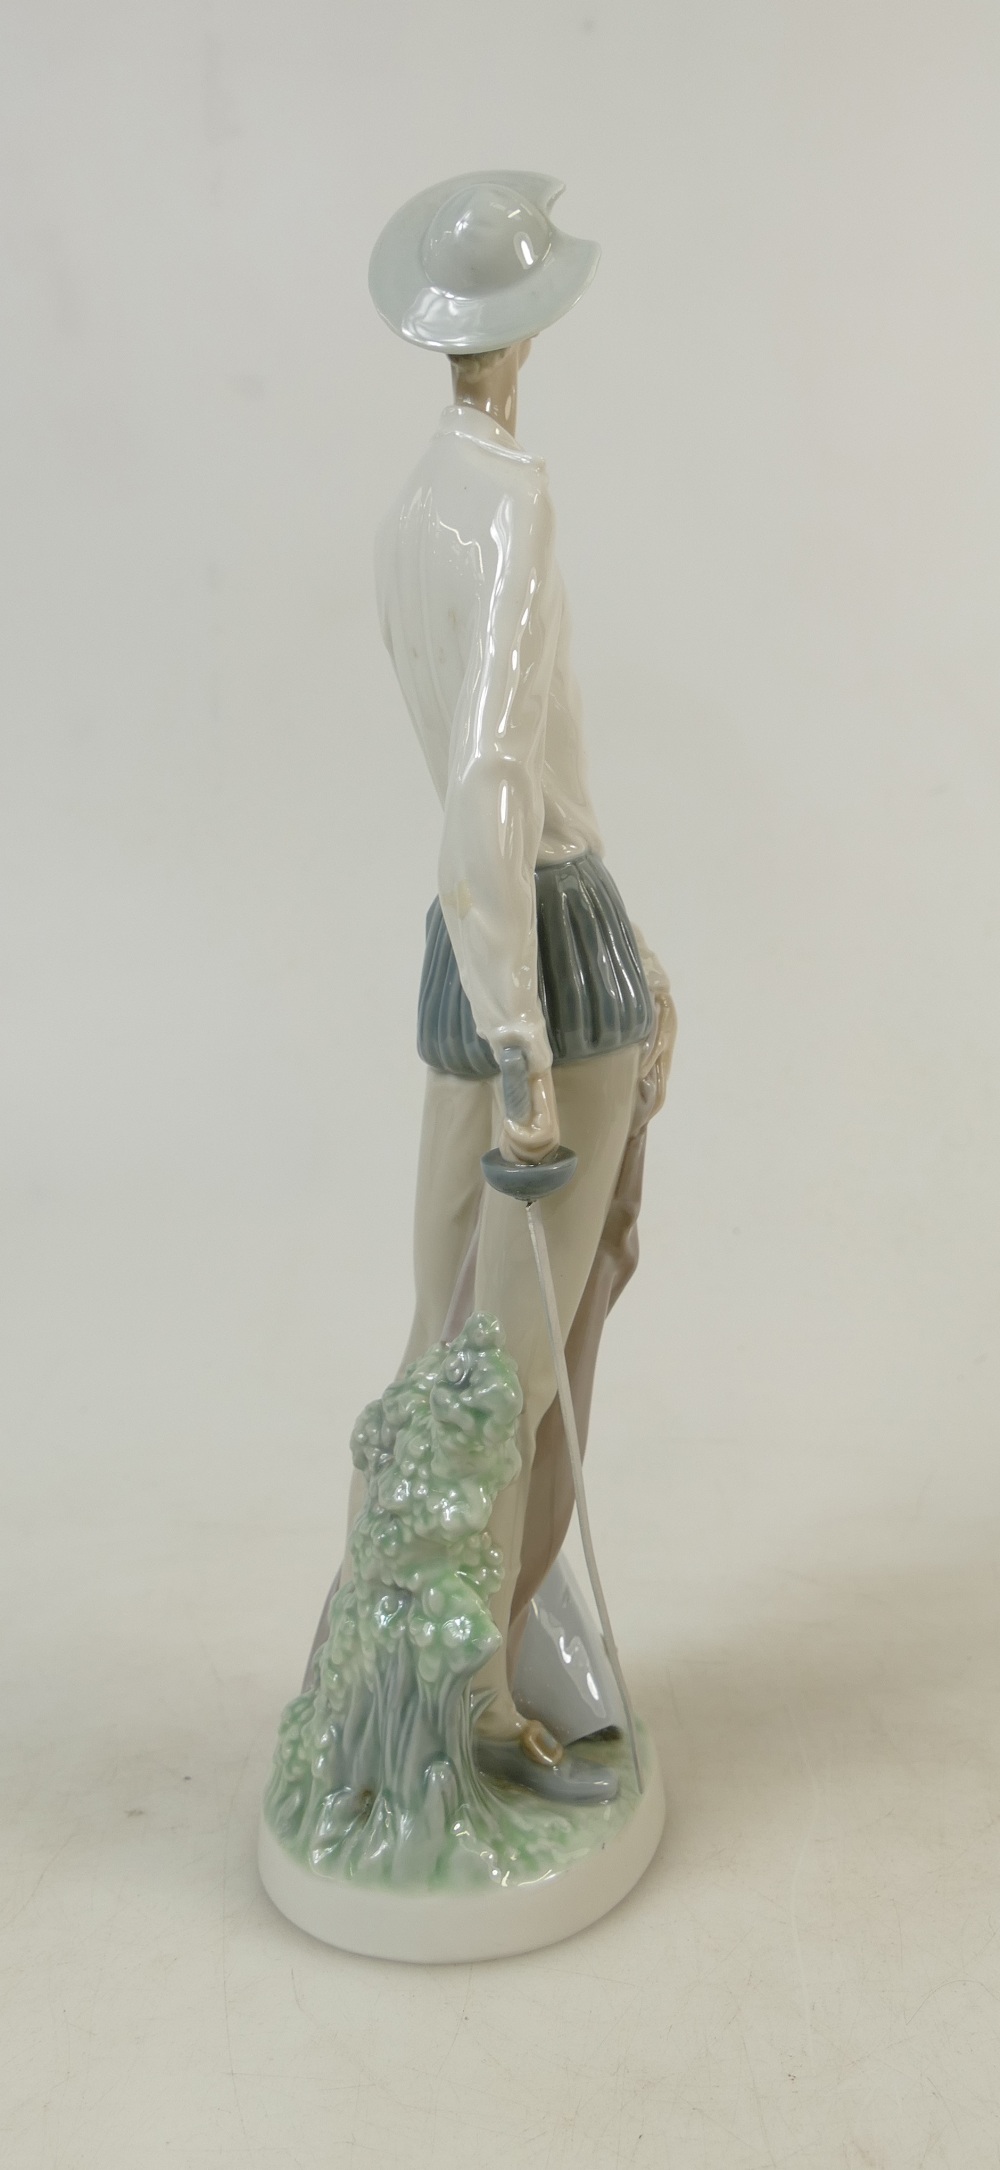 Lladro figure titled 'Don Quixote Standing with Sword': LLadro model 4854, height 31cm. - Image 3 of 5